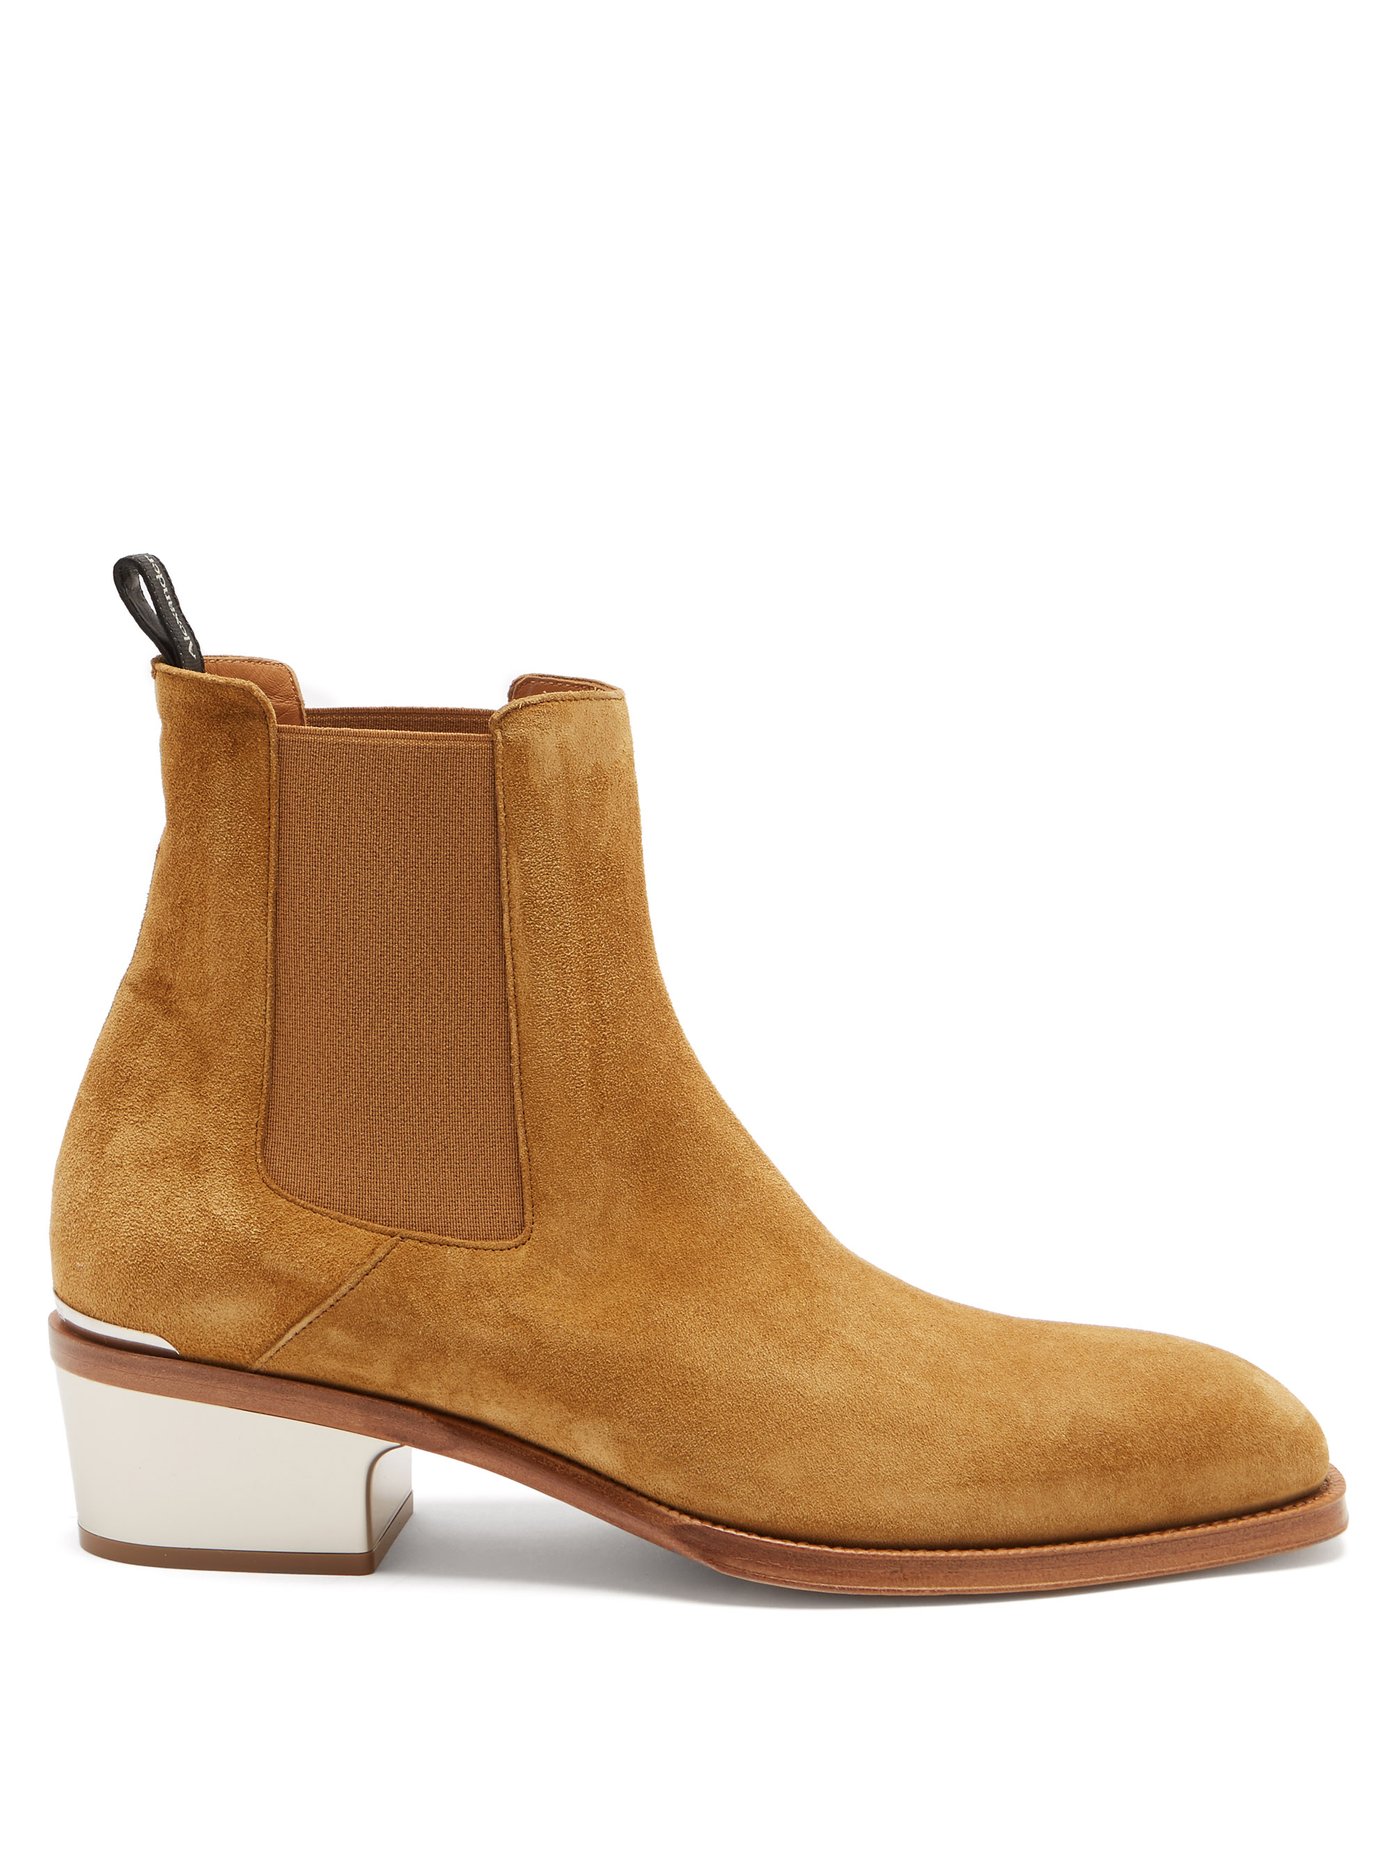 square toe suede boots